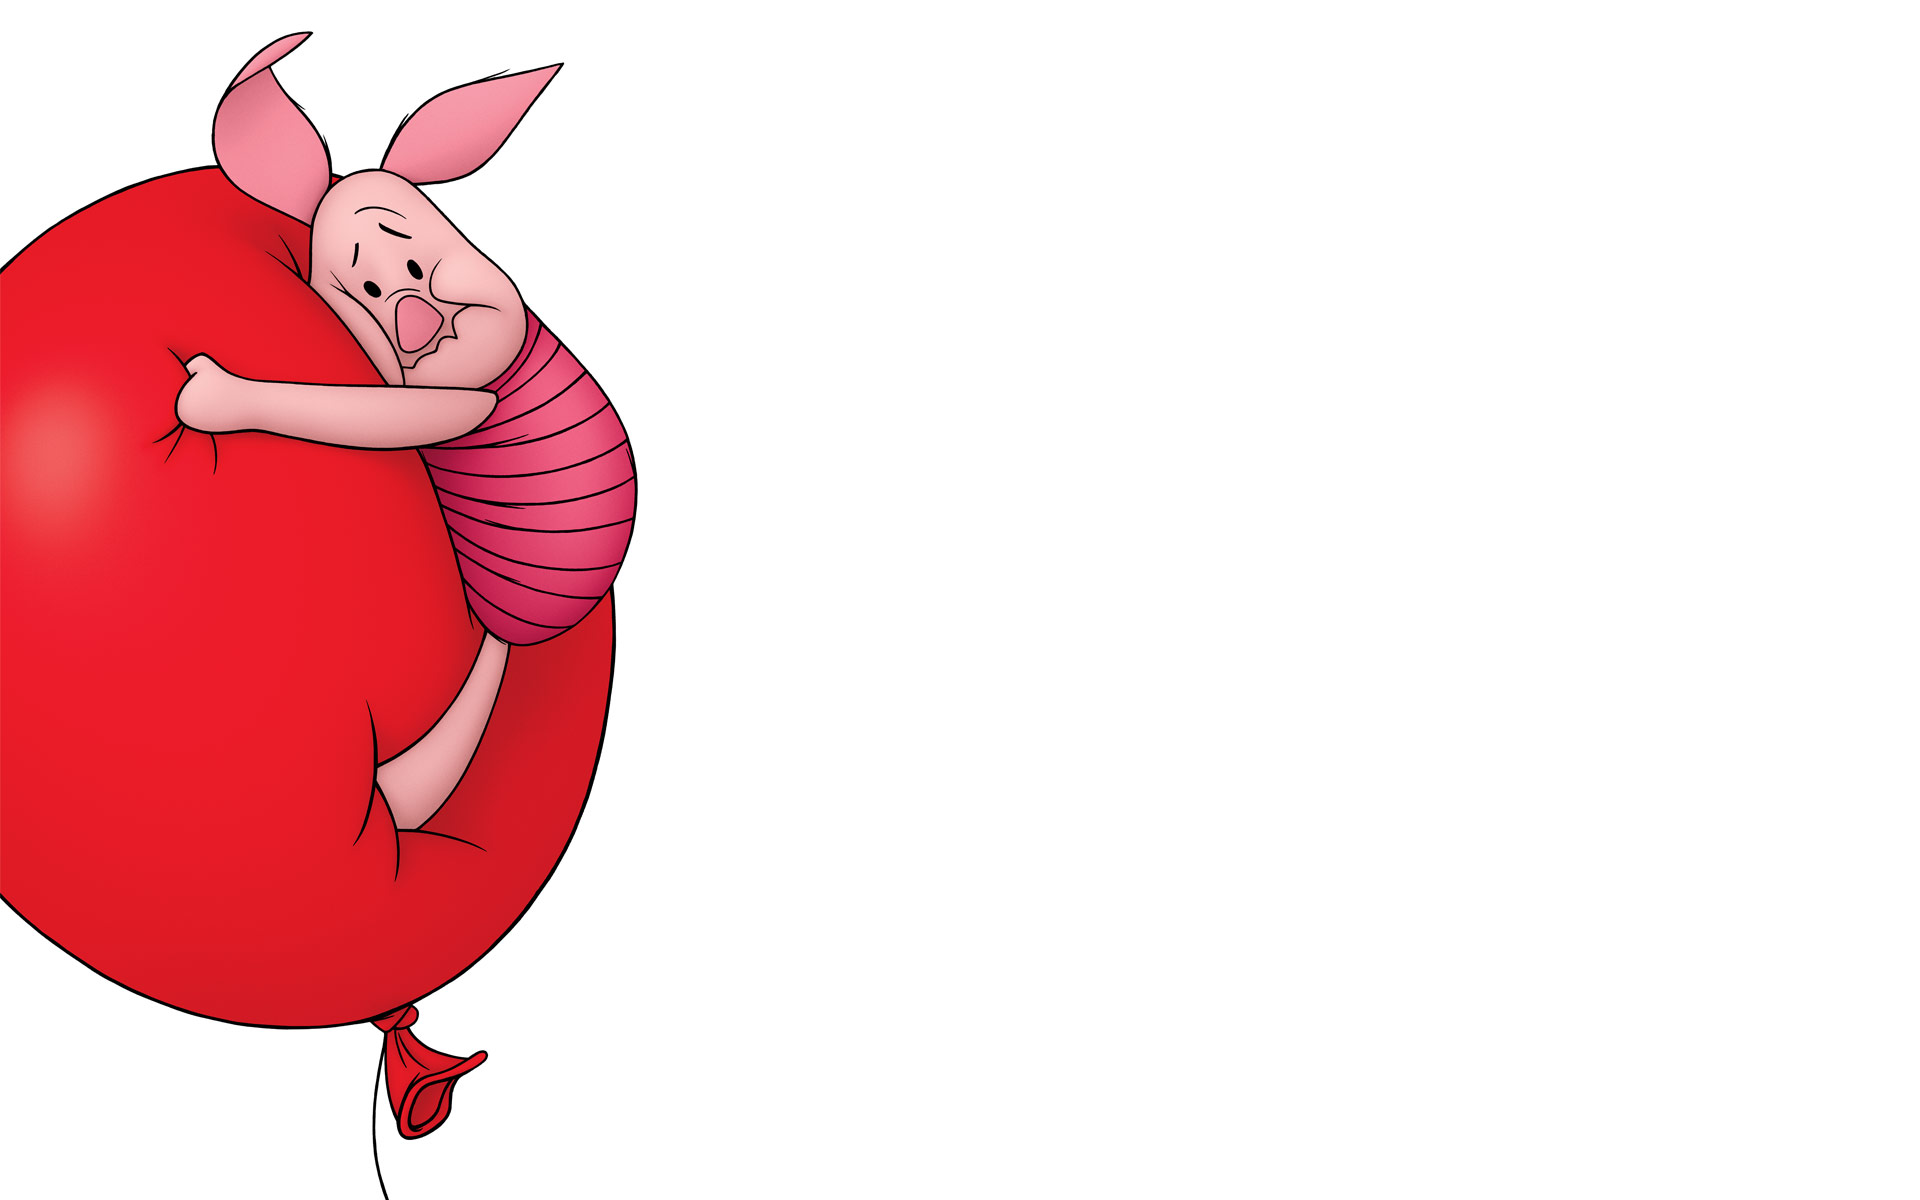 Piglet from Winnie the Pooh wallpaper   Click picture for high